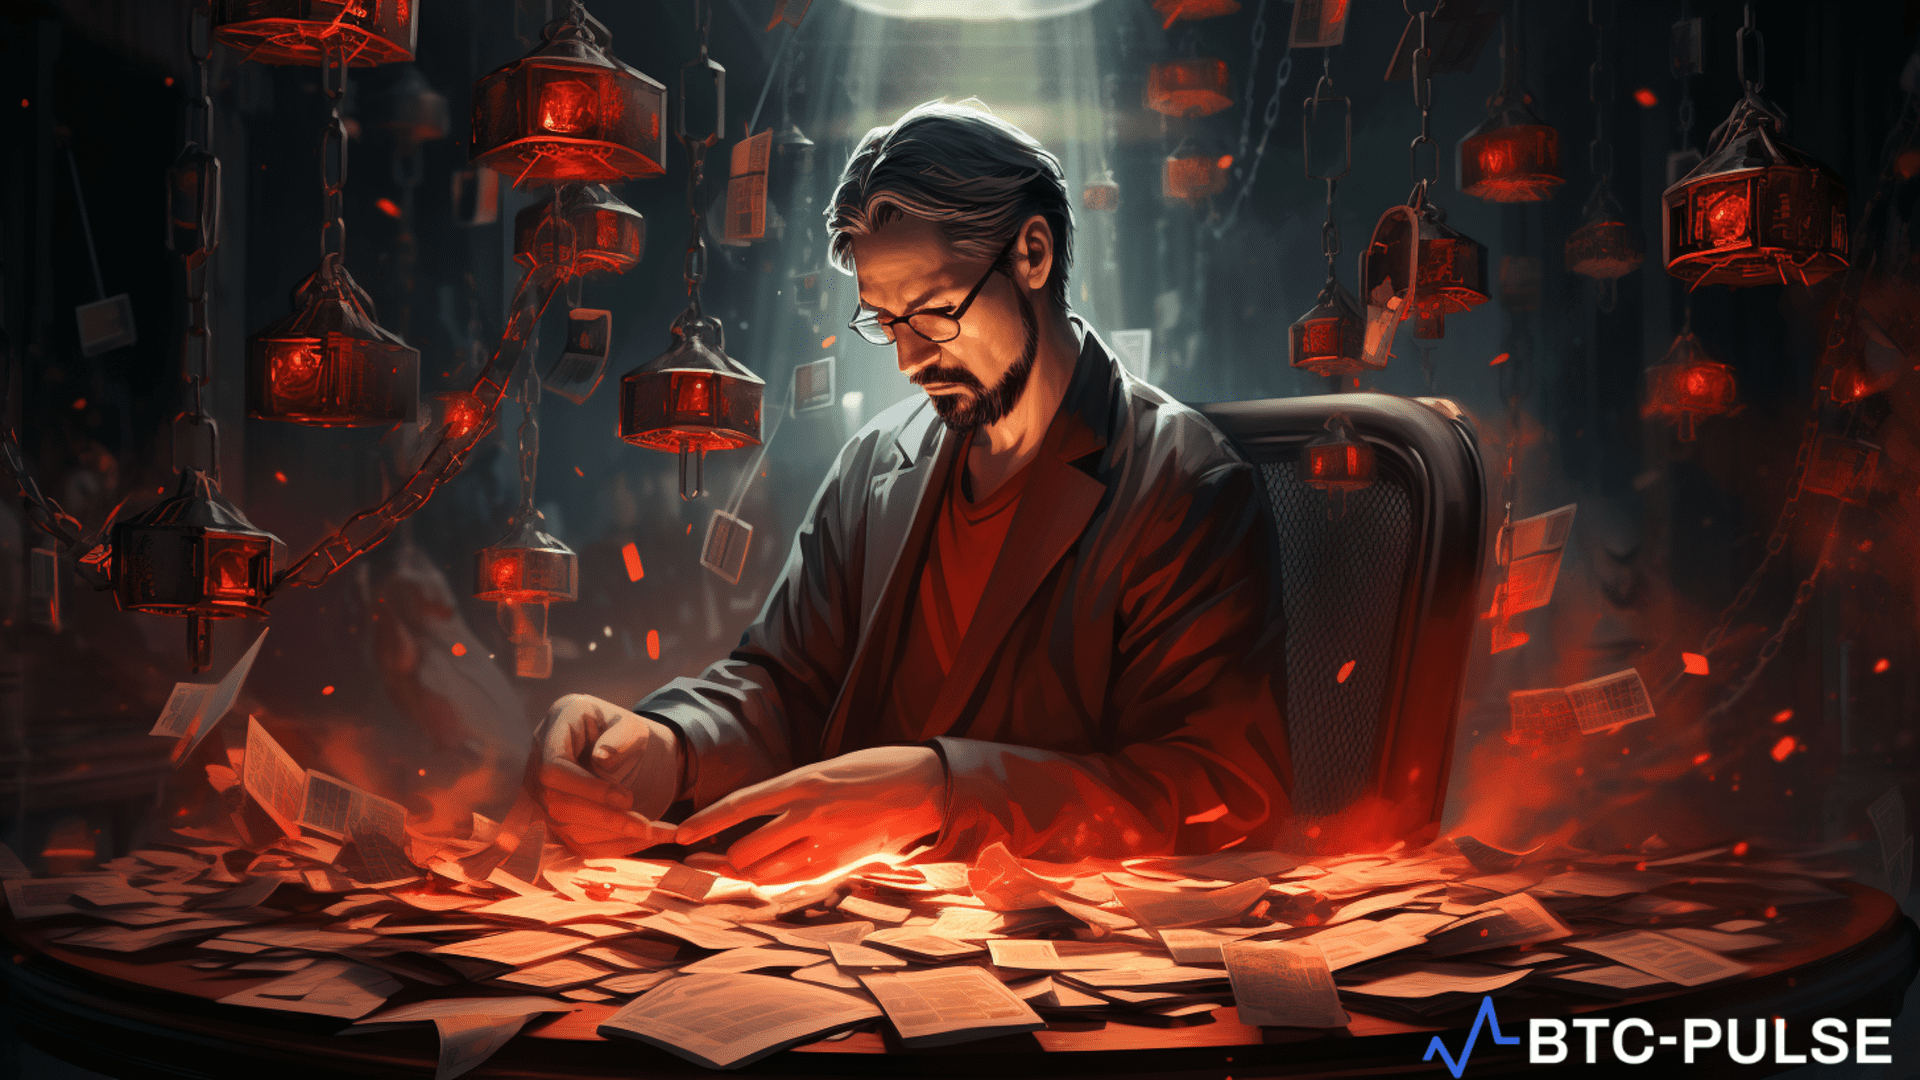 Illustration of China's crackdown on blockchain and metaverse-related cybercrime, highlighting the legal efforts to safeguard digital asset integrity.